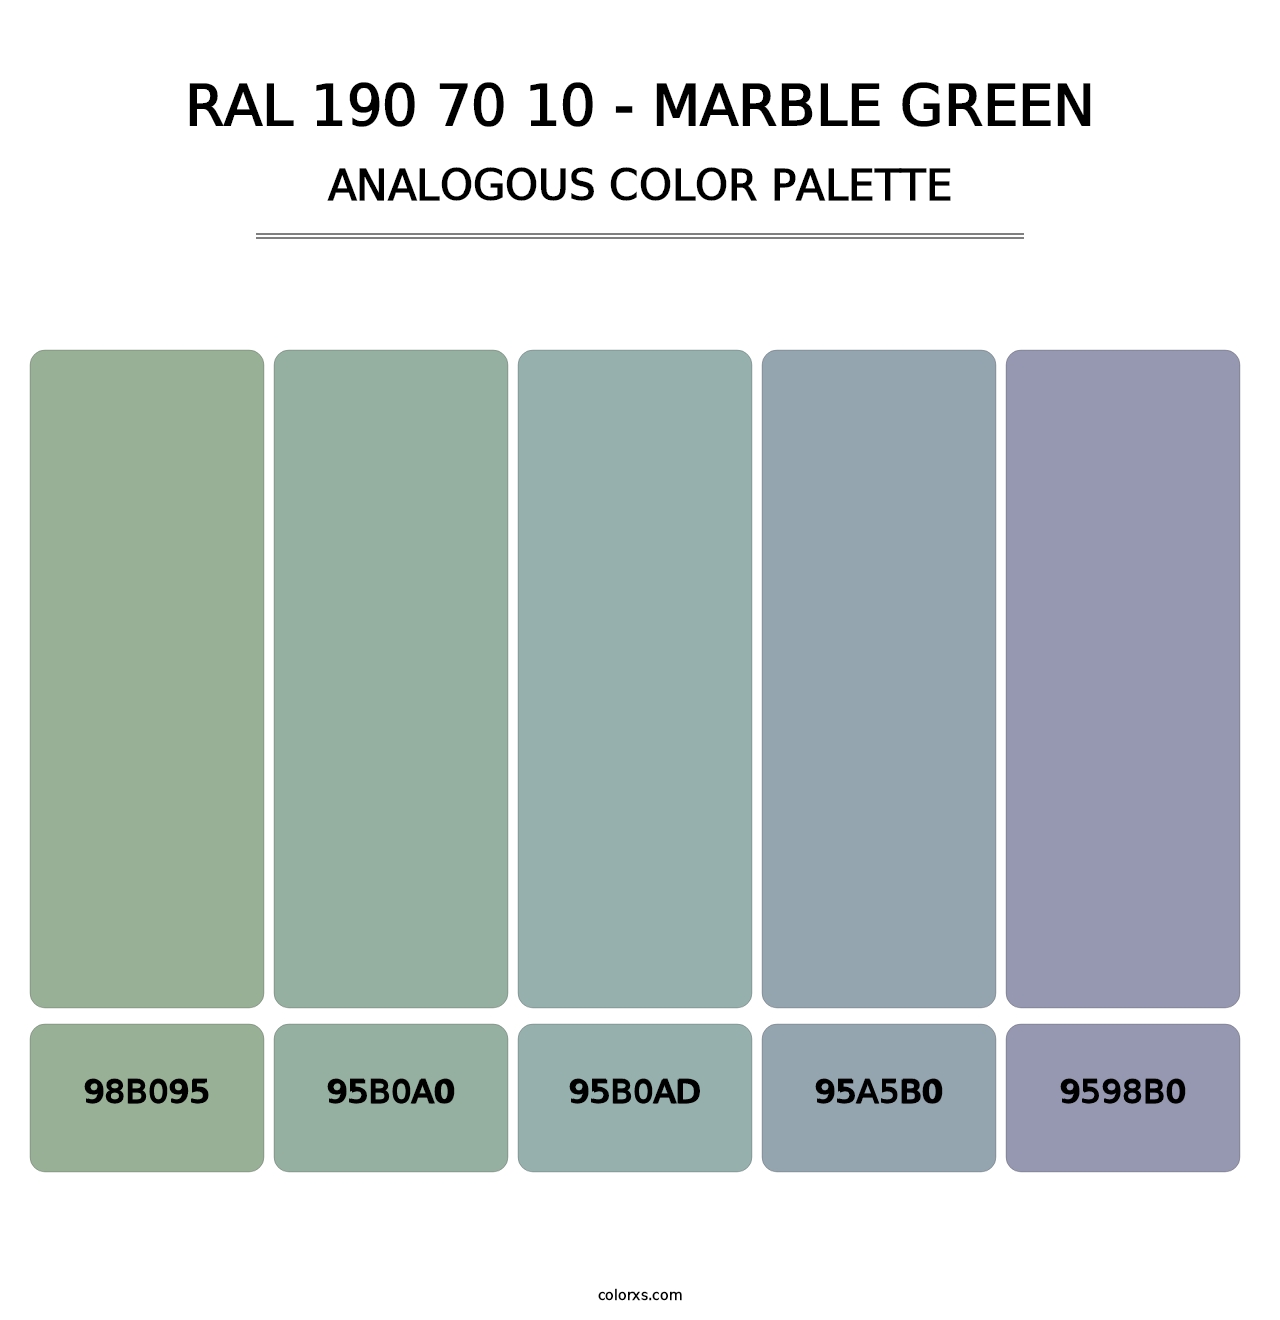 RAL 190 70 10 - Marble Green - Analogous Color Palette